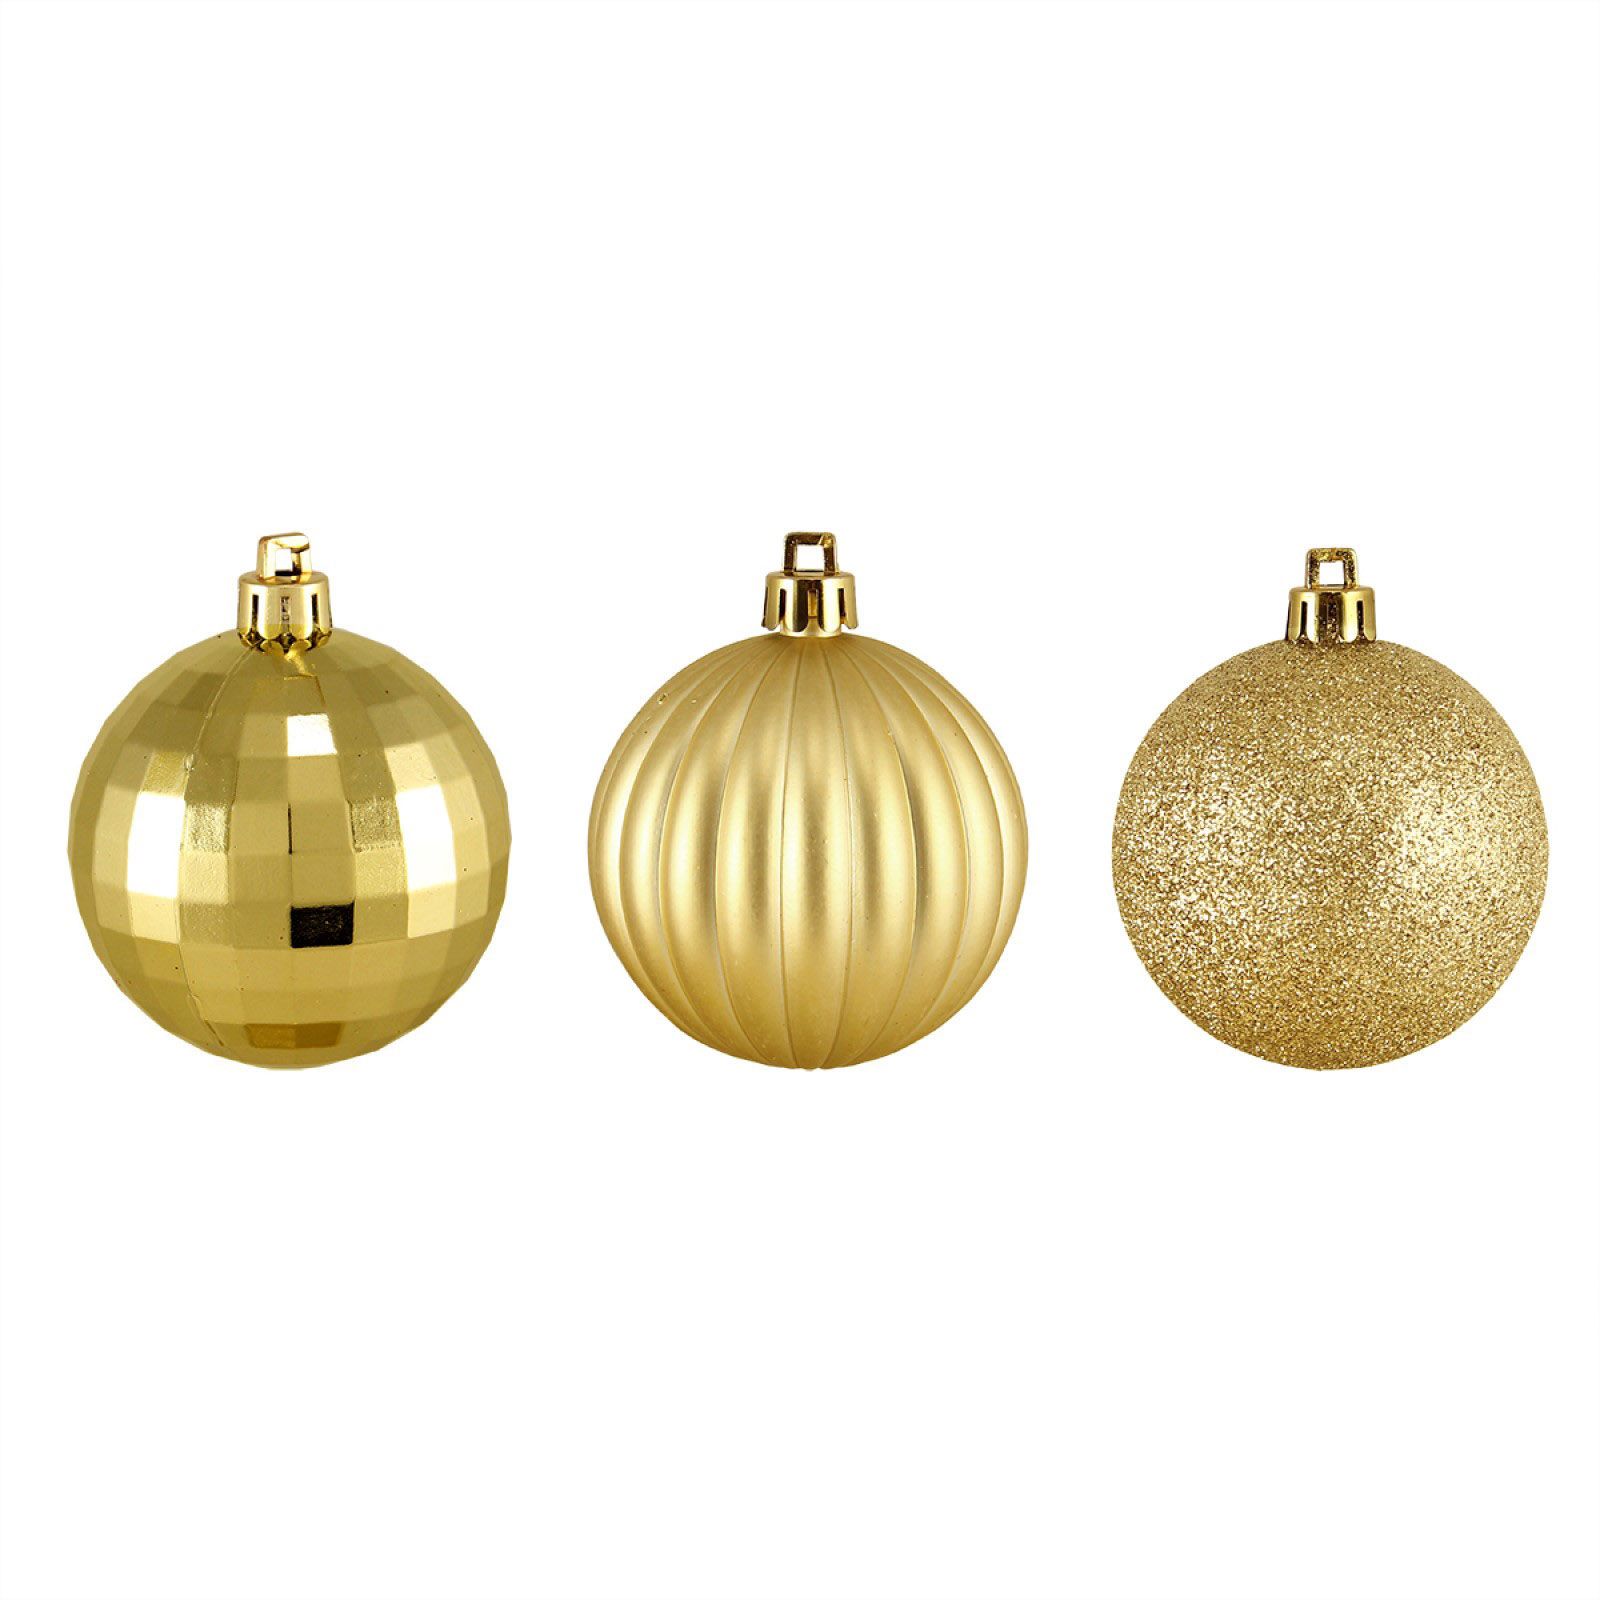 Northlight 2.75 Gold Mirrored Glass Disco Ball Christmas Ornaments, 6 ct.